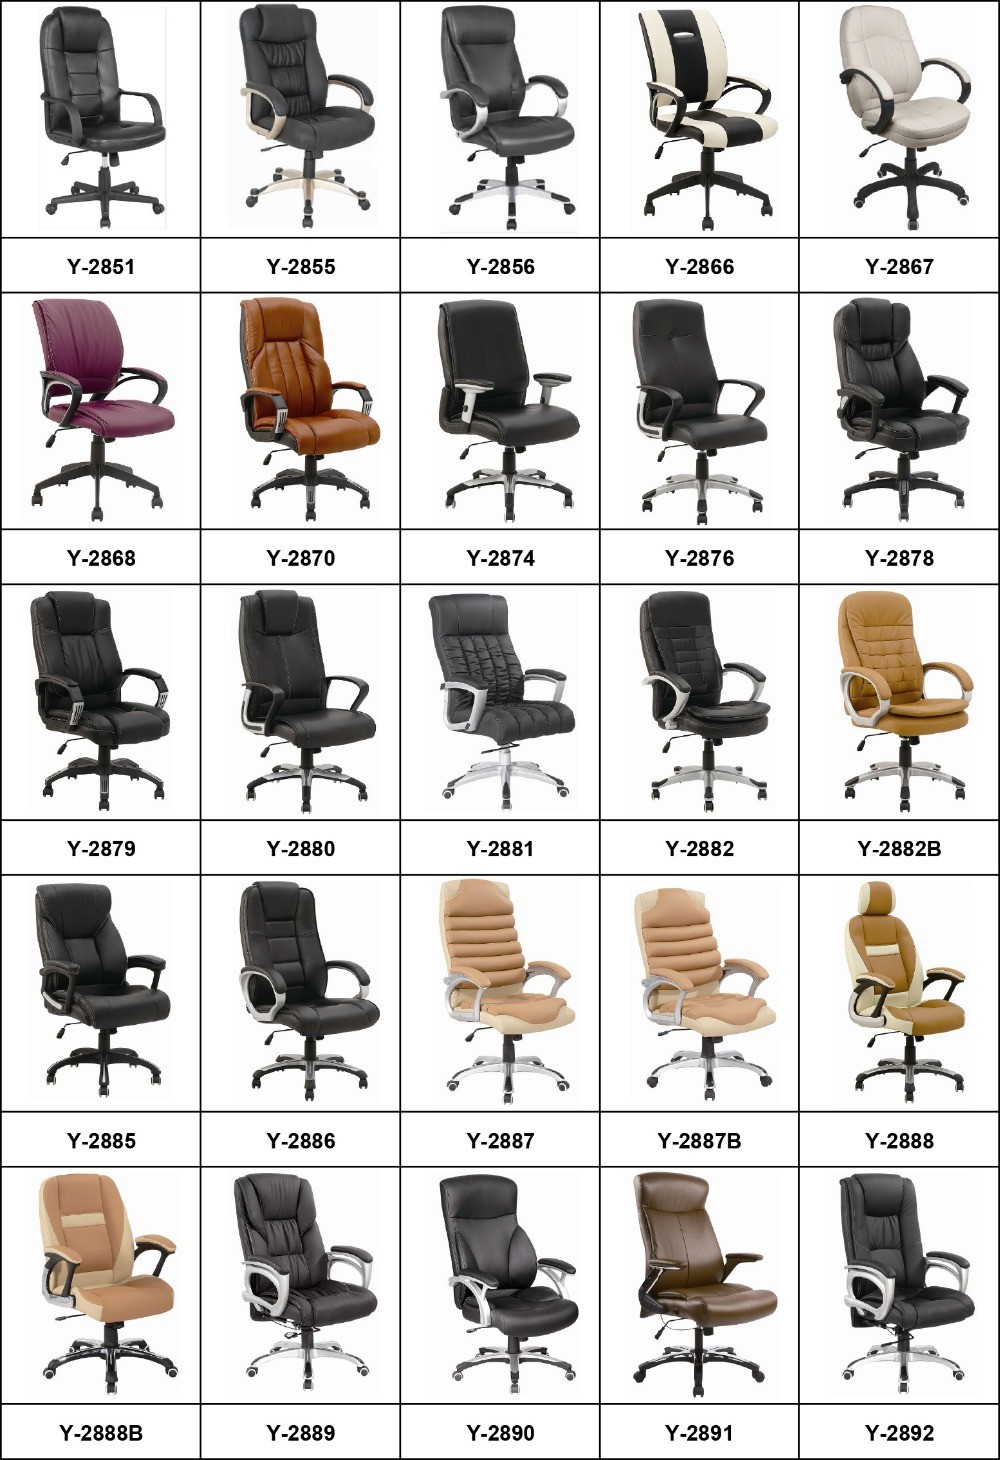 Y-2742 Classic Executive Home Study Computer Office Chair with Prices for Chairs